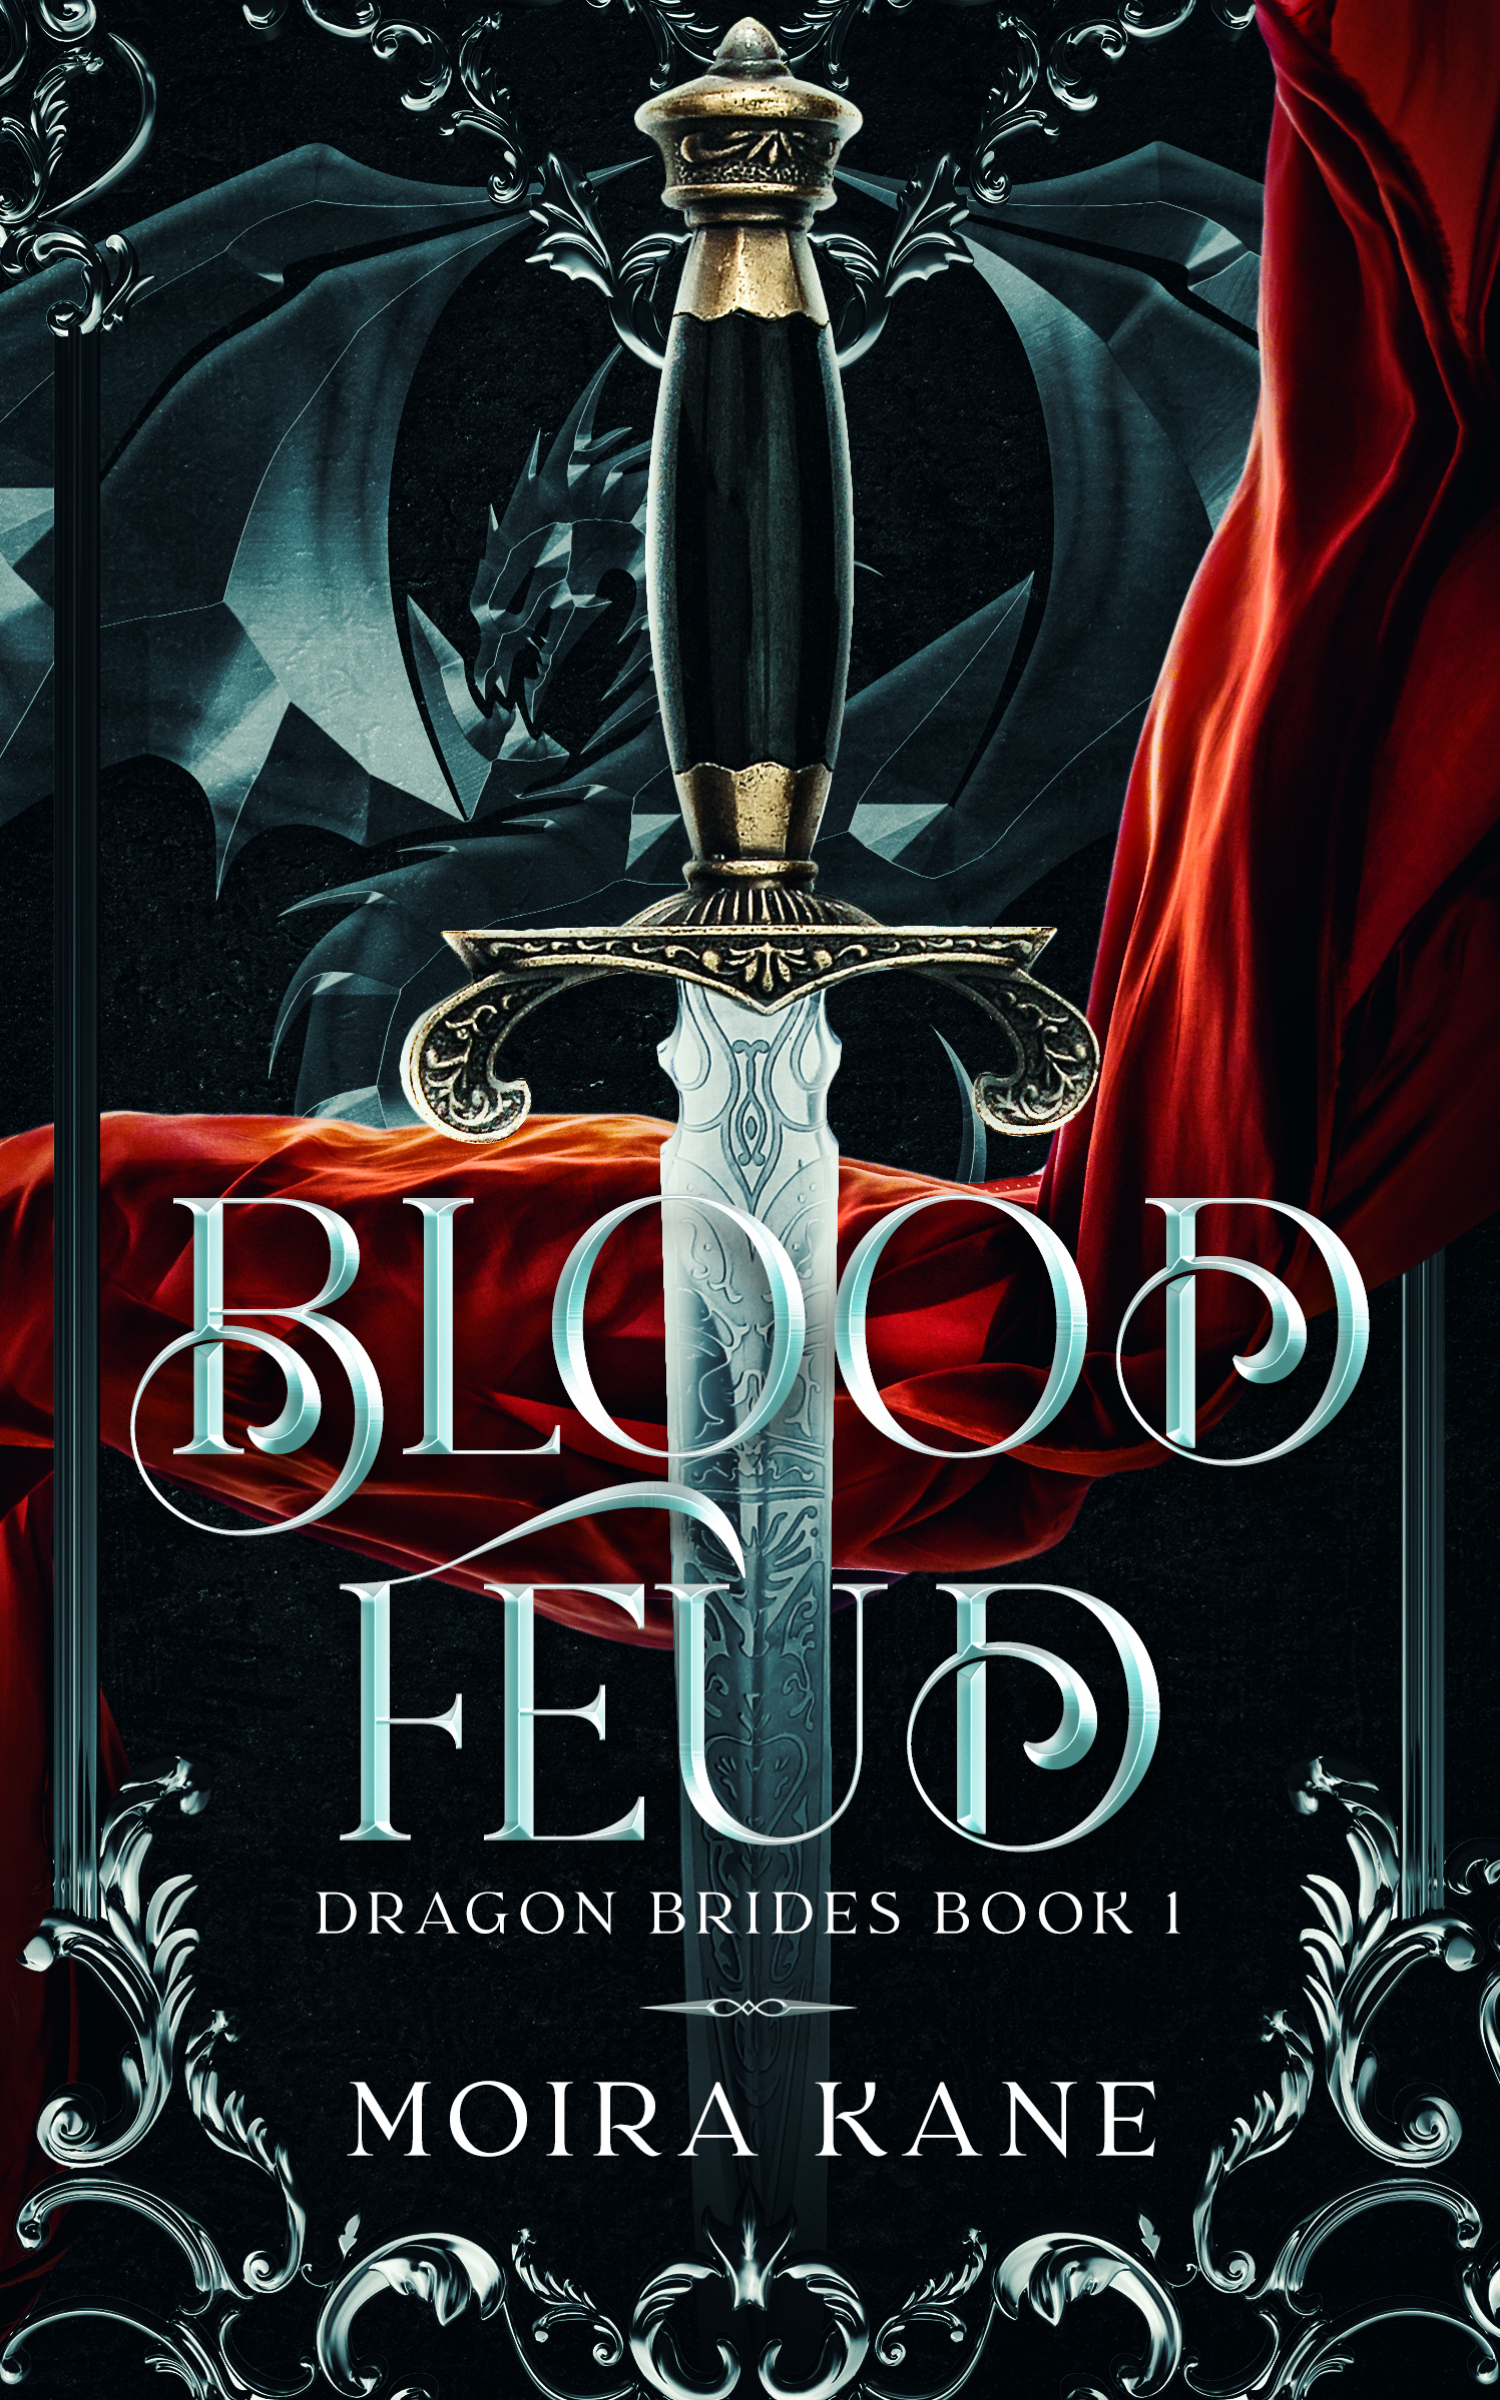 A sword slicing through a red ribbon. Image text reads Blood Feud by Moira Kane